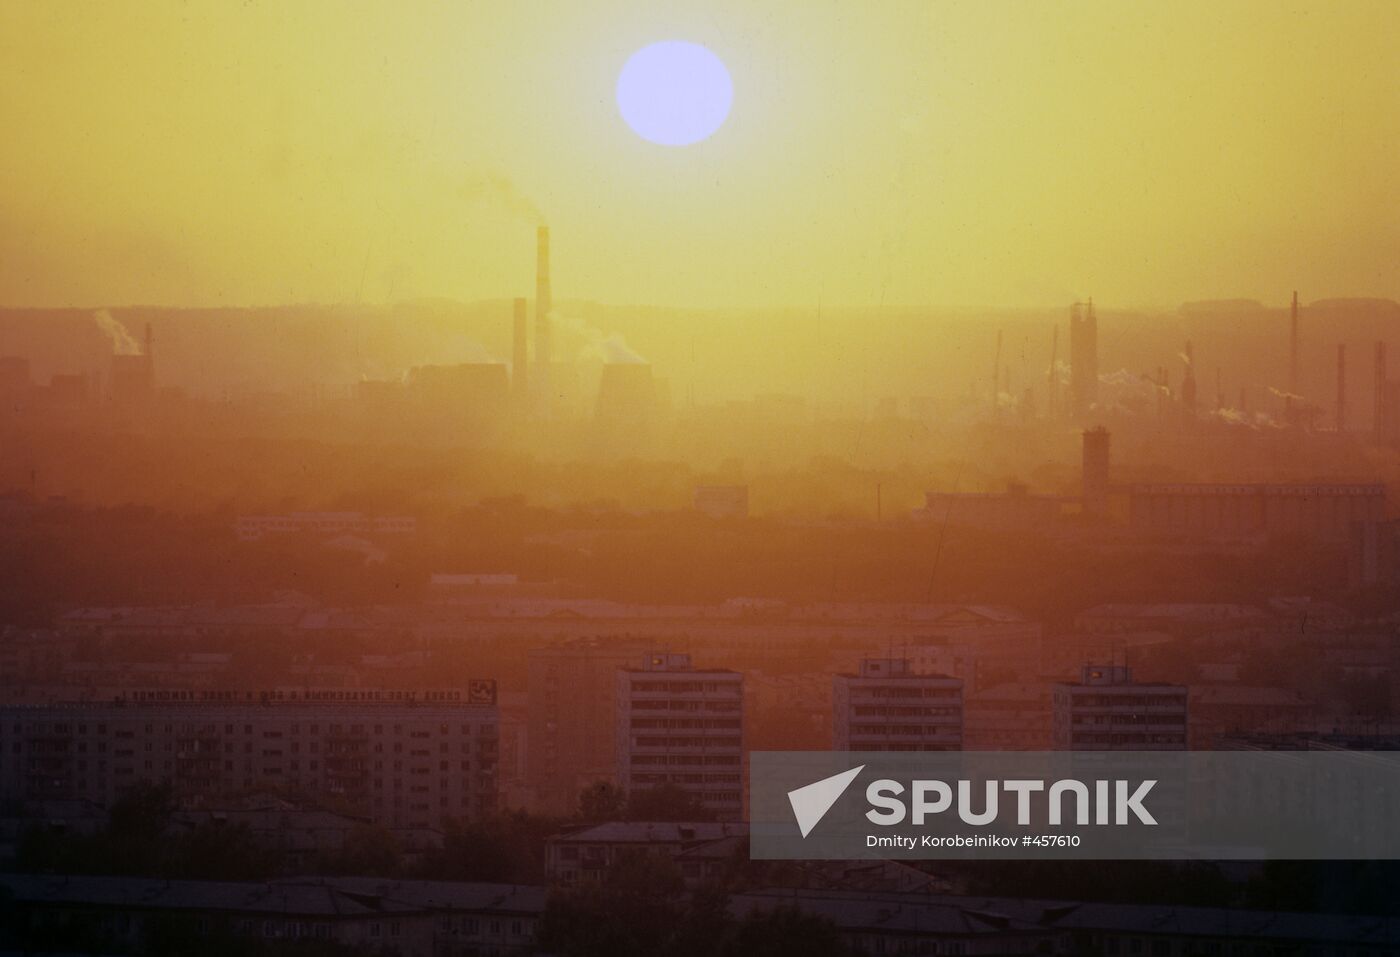 Smog hanging over one of the cities in Kemerovo region